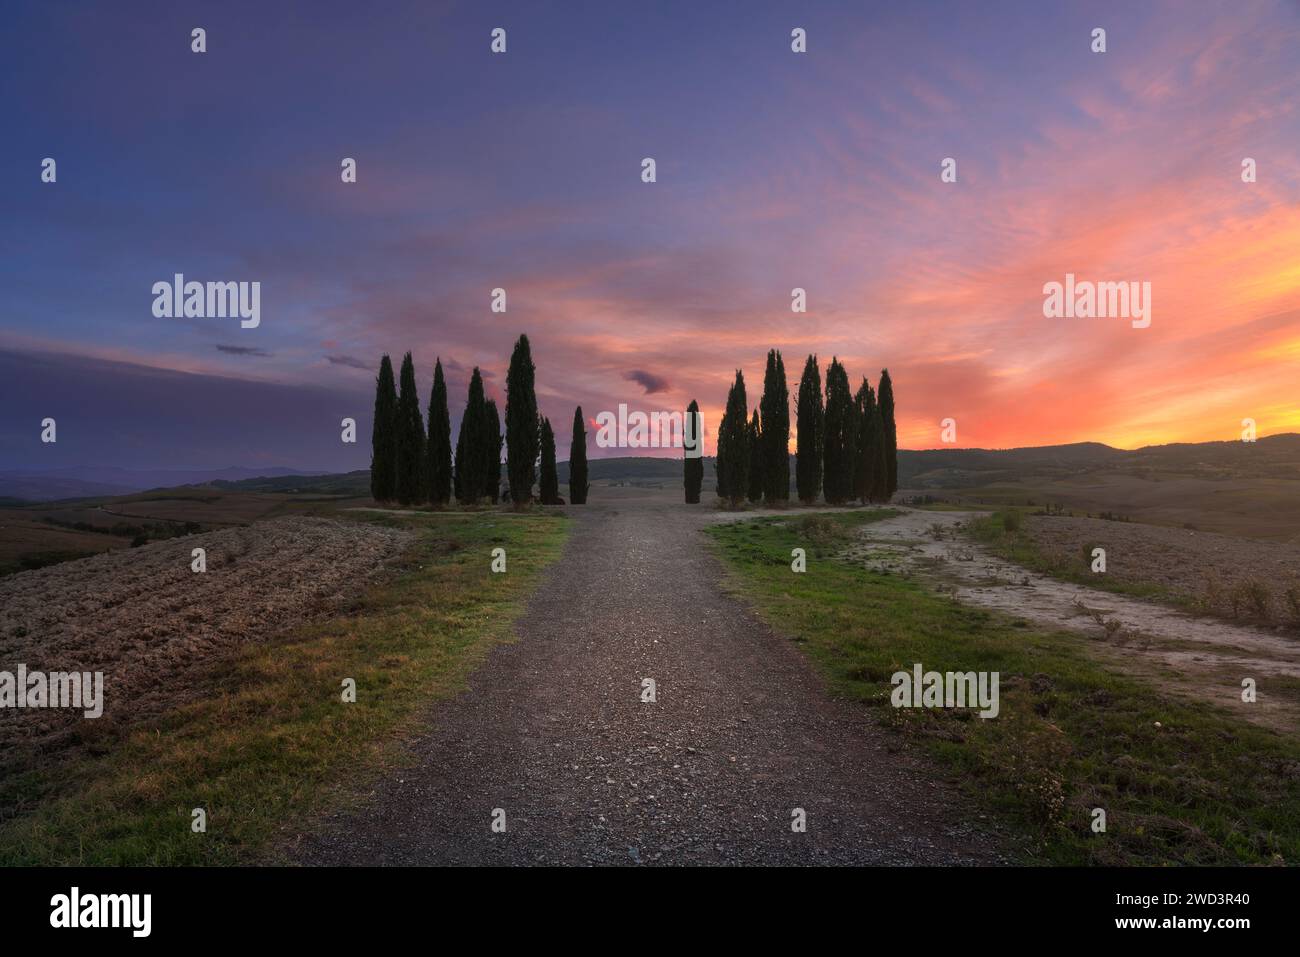 SAN QUIRICO D'ORCIA, TUSCANY / ITALY - October 27, 2023: The circle of cypresses of San Quirico d'Orcia in Val d'Orcia, during a colorful sunset in au Stock Photo